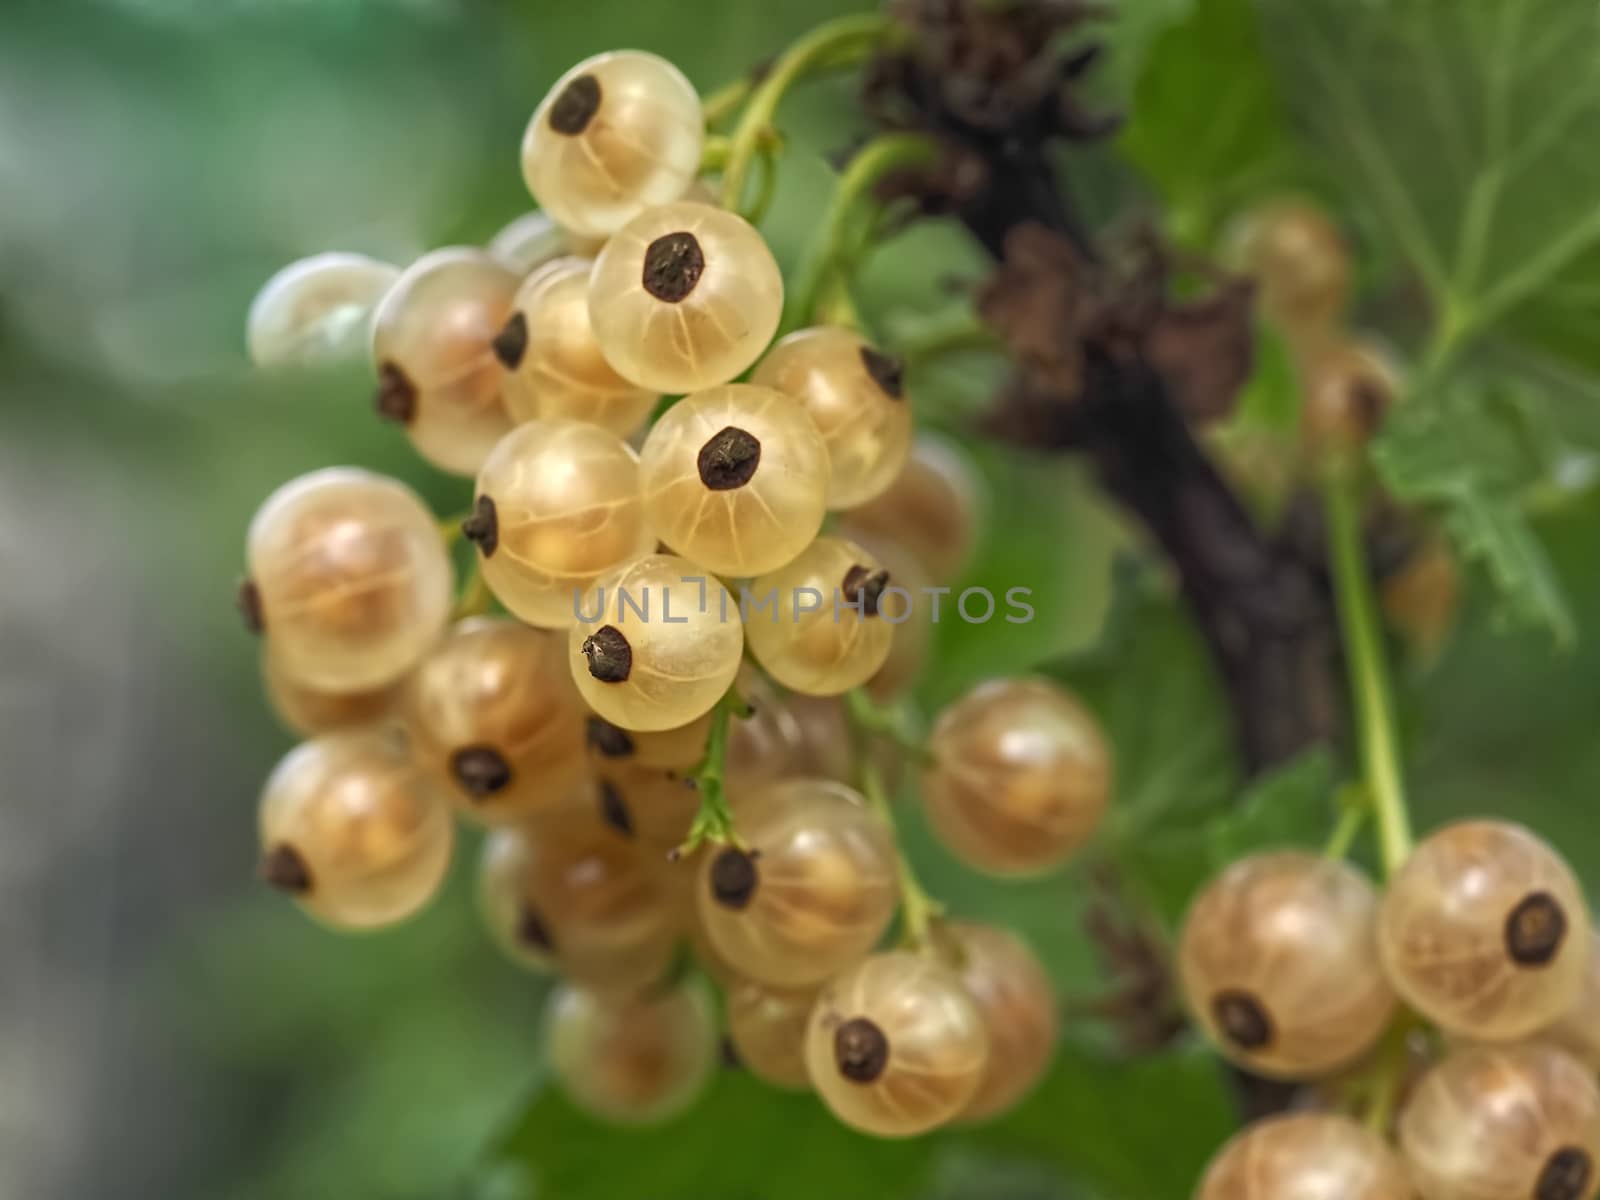 Red currants ripening in the sun at a bush by Stimmungsbilder